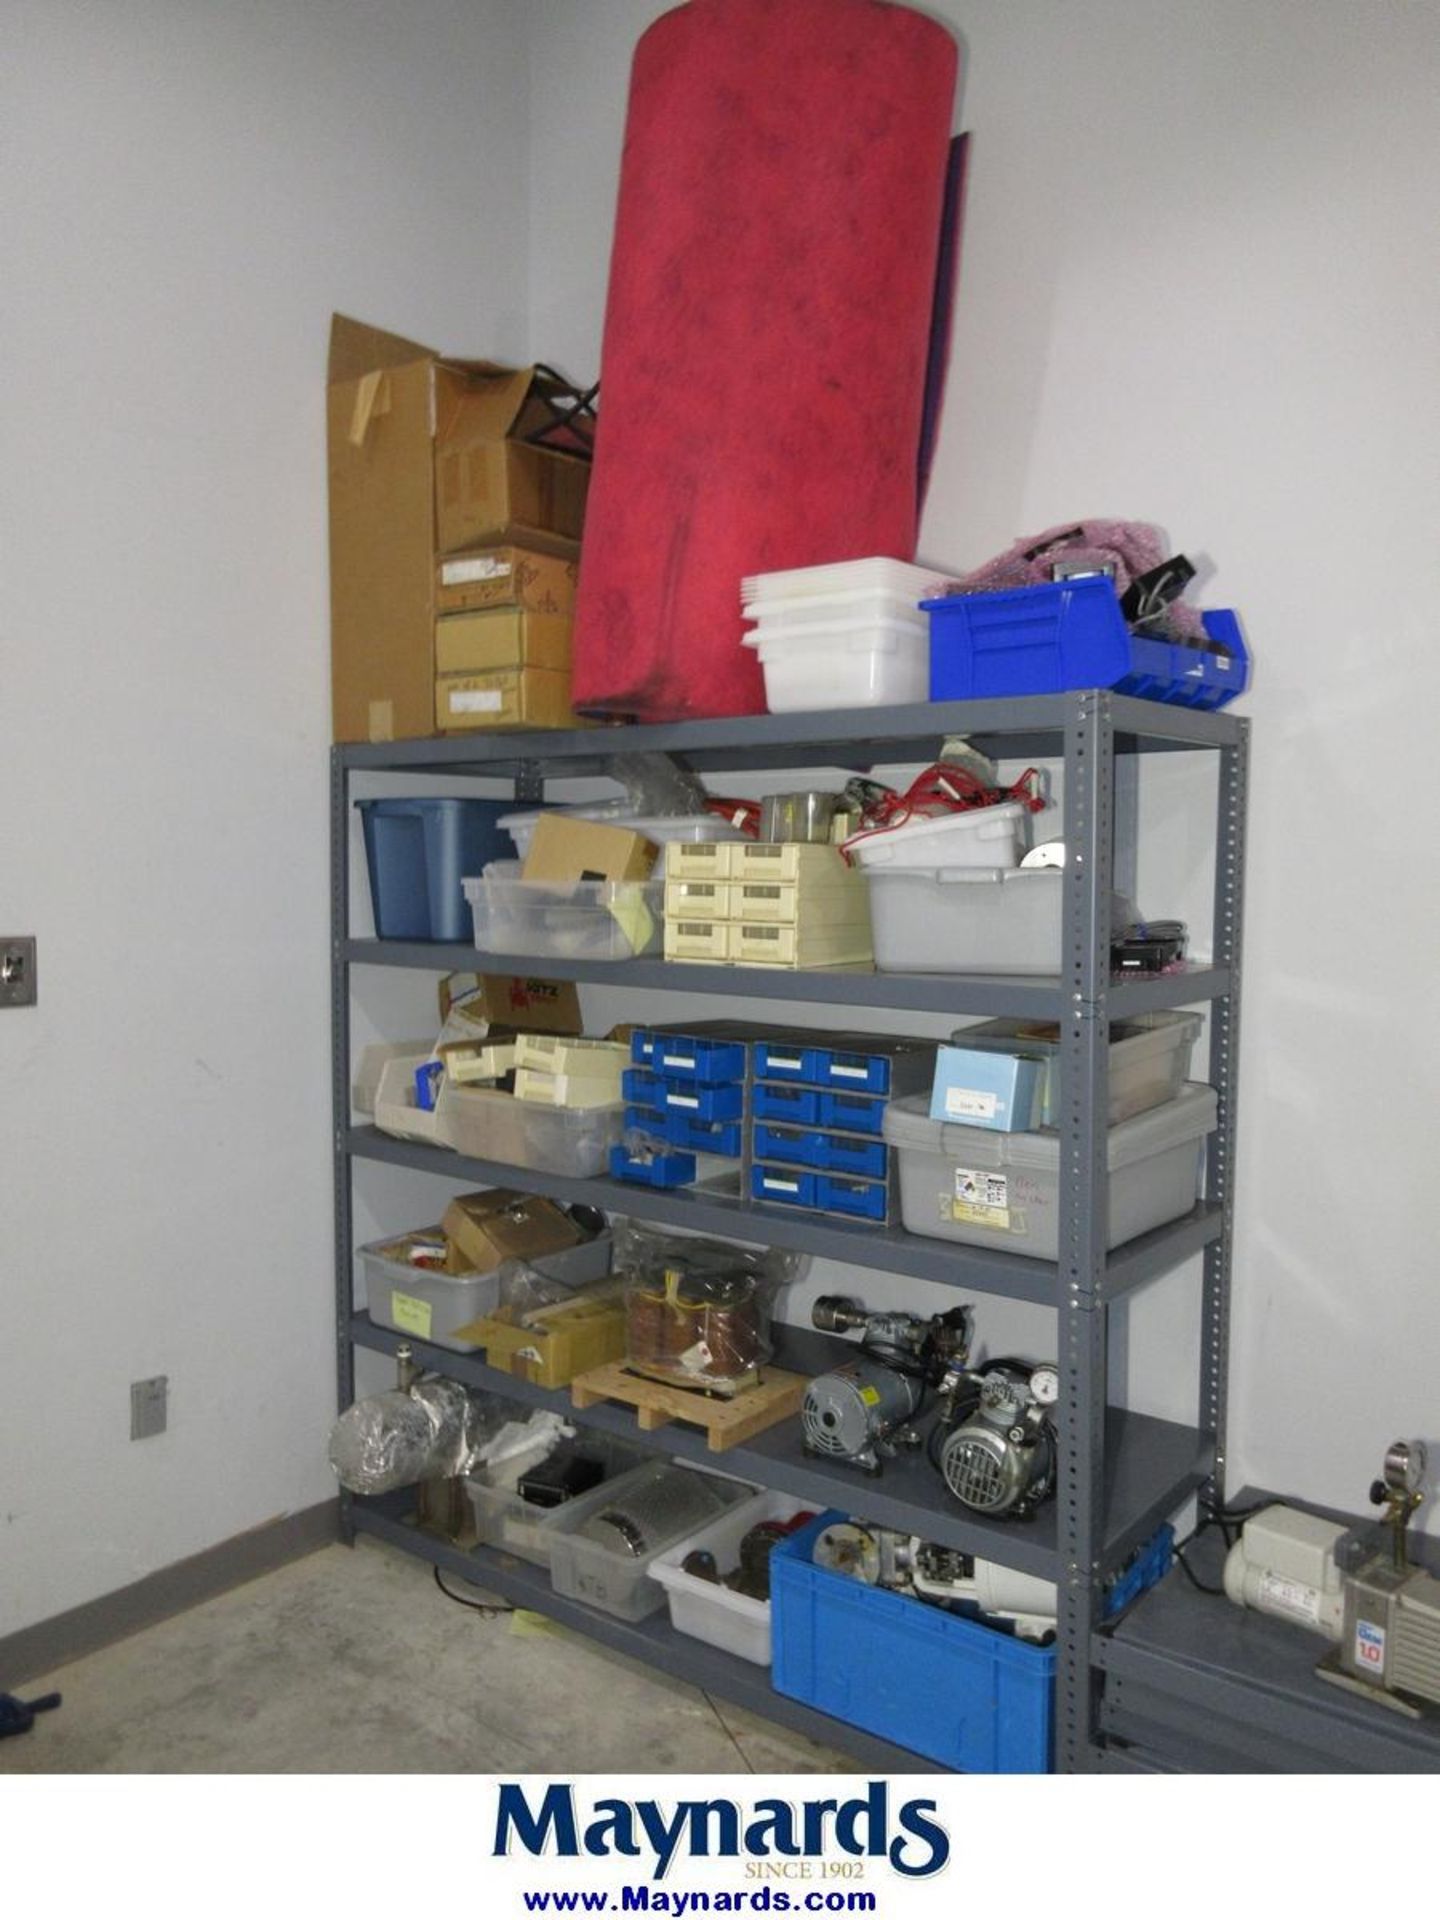 Contents of Web Storage Room - Image 17 of 24